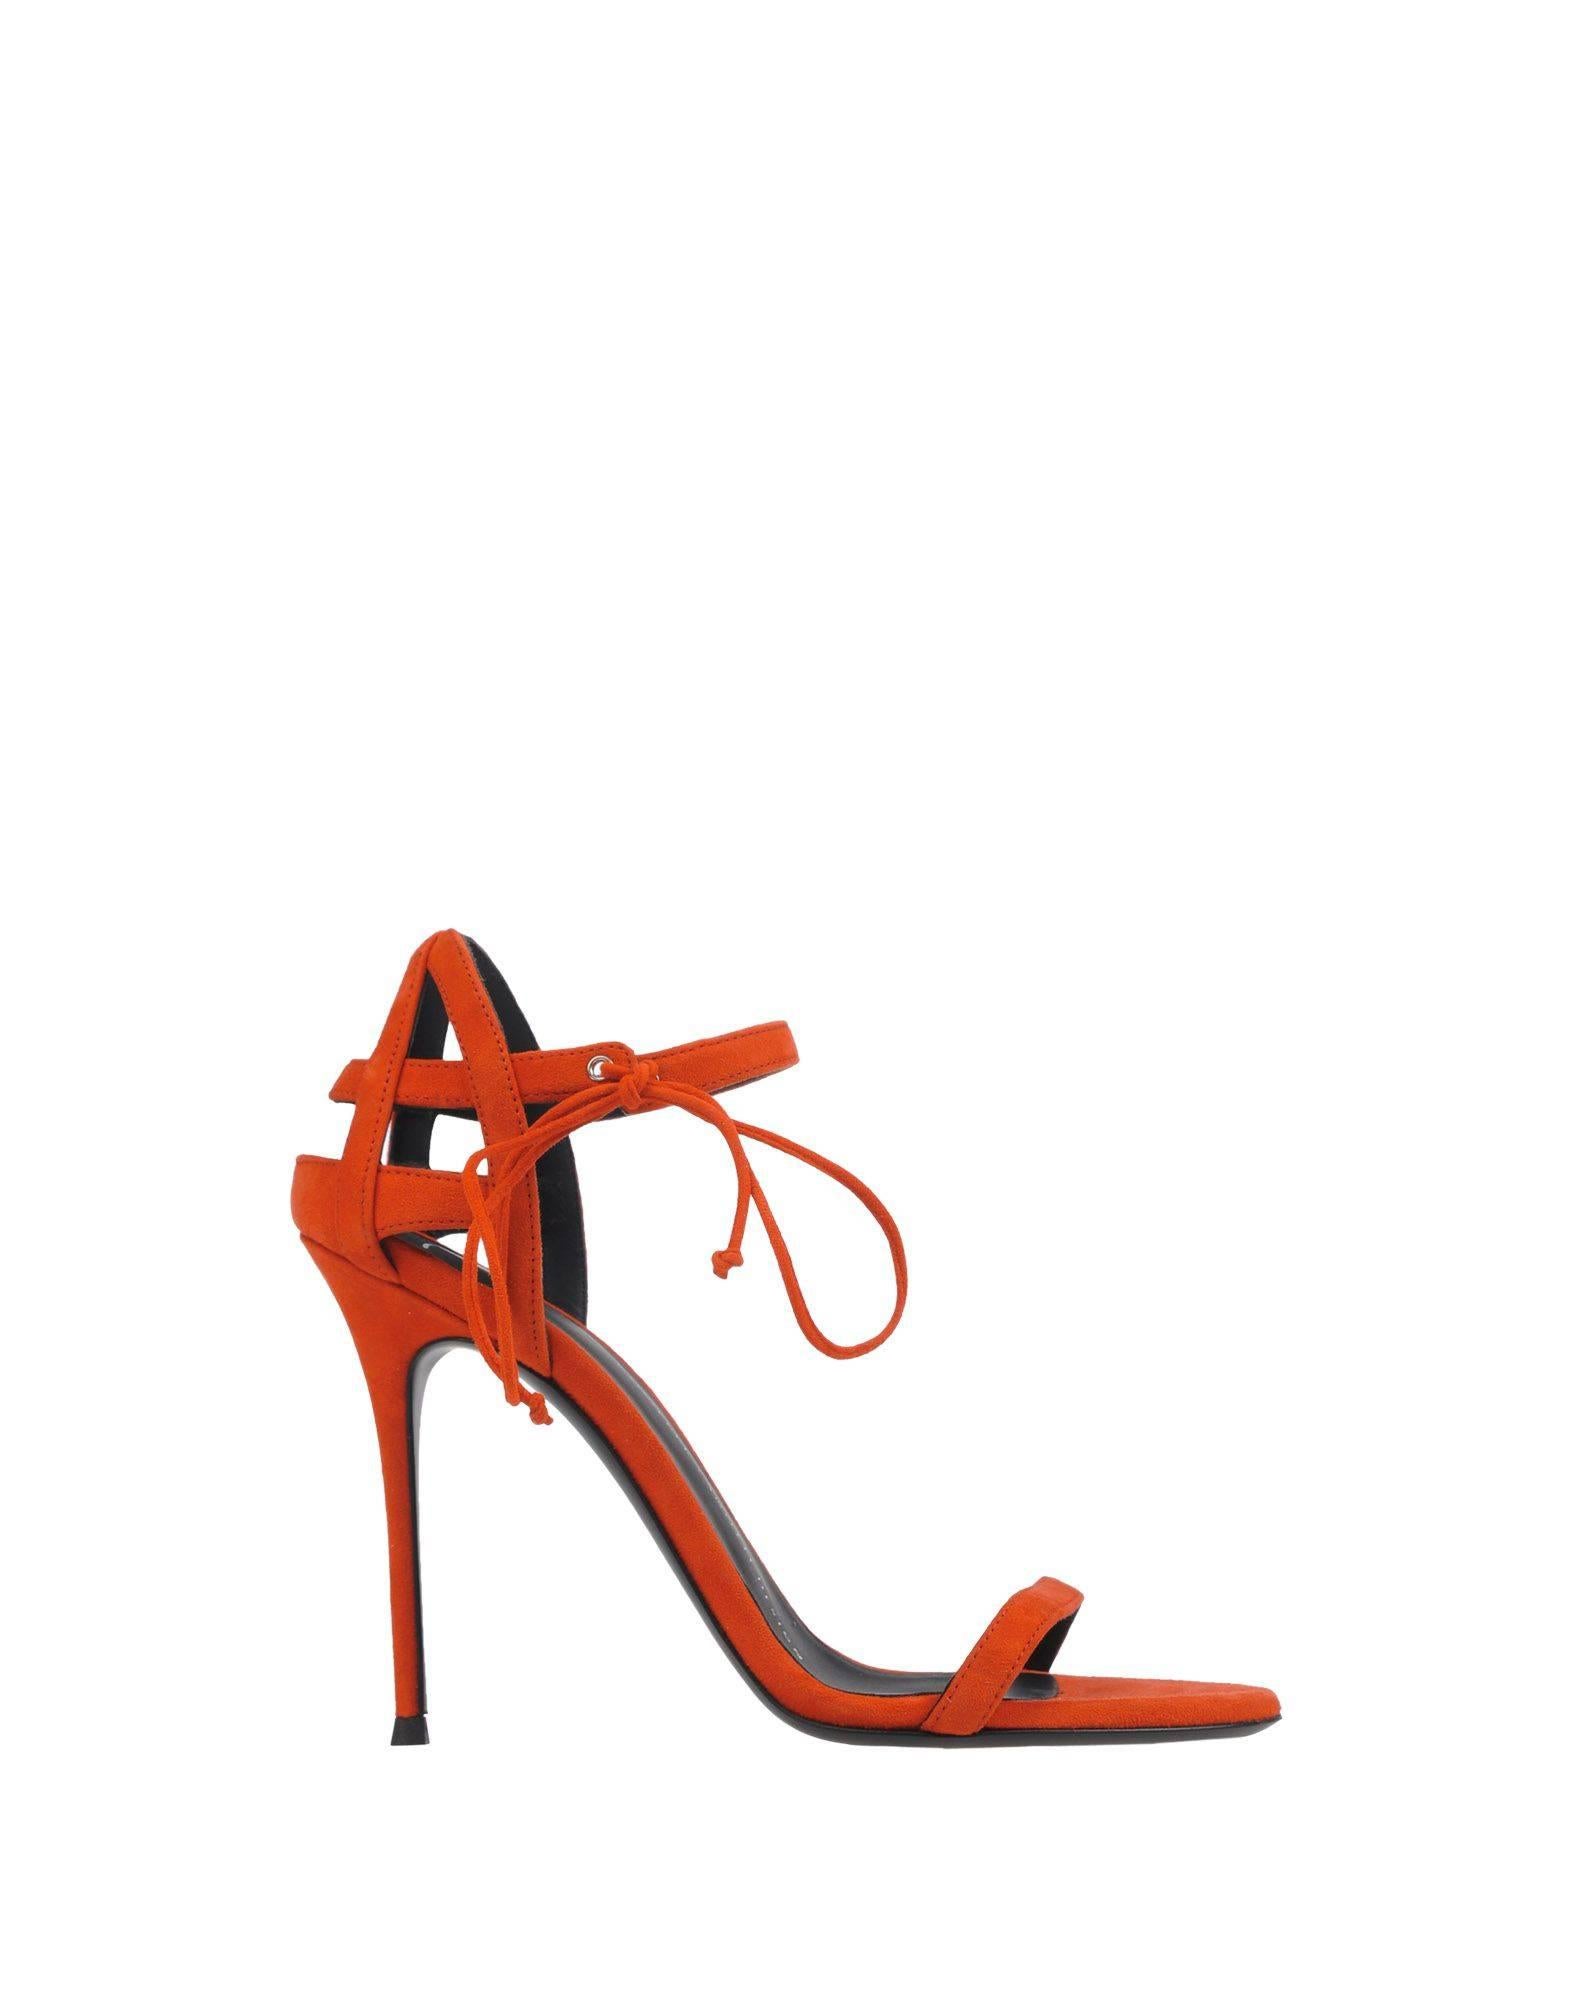 Red Giuseppe Zanotti New Suede Cage Cut Out Sandals Heels in Box 